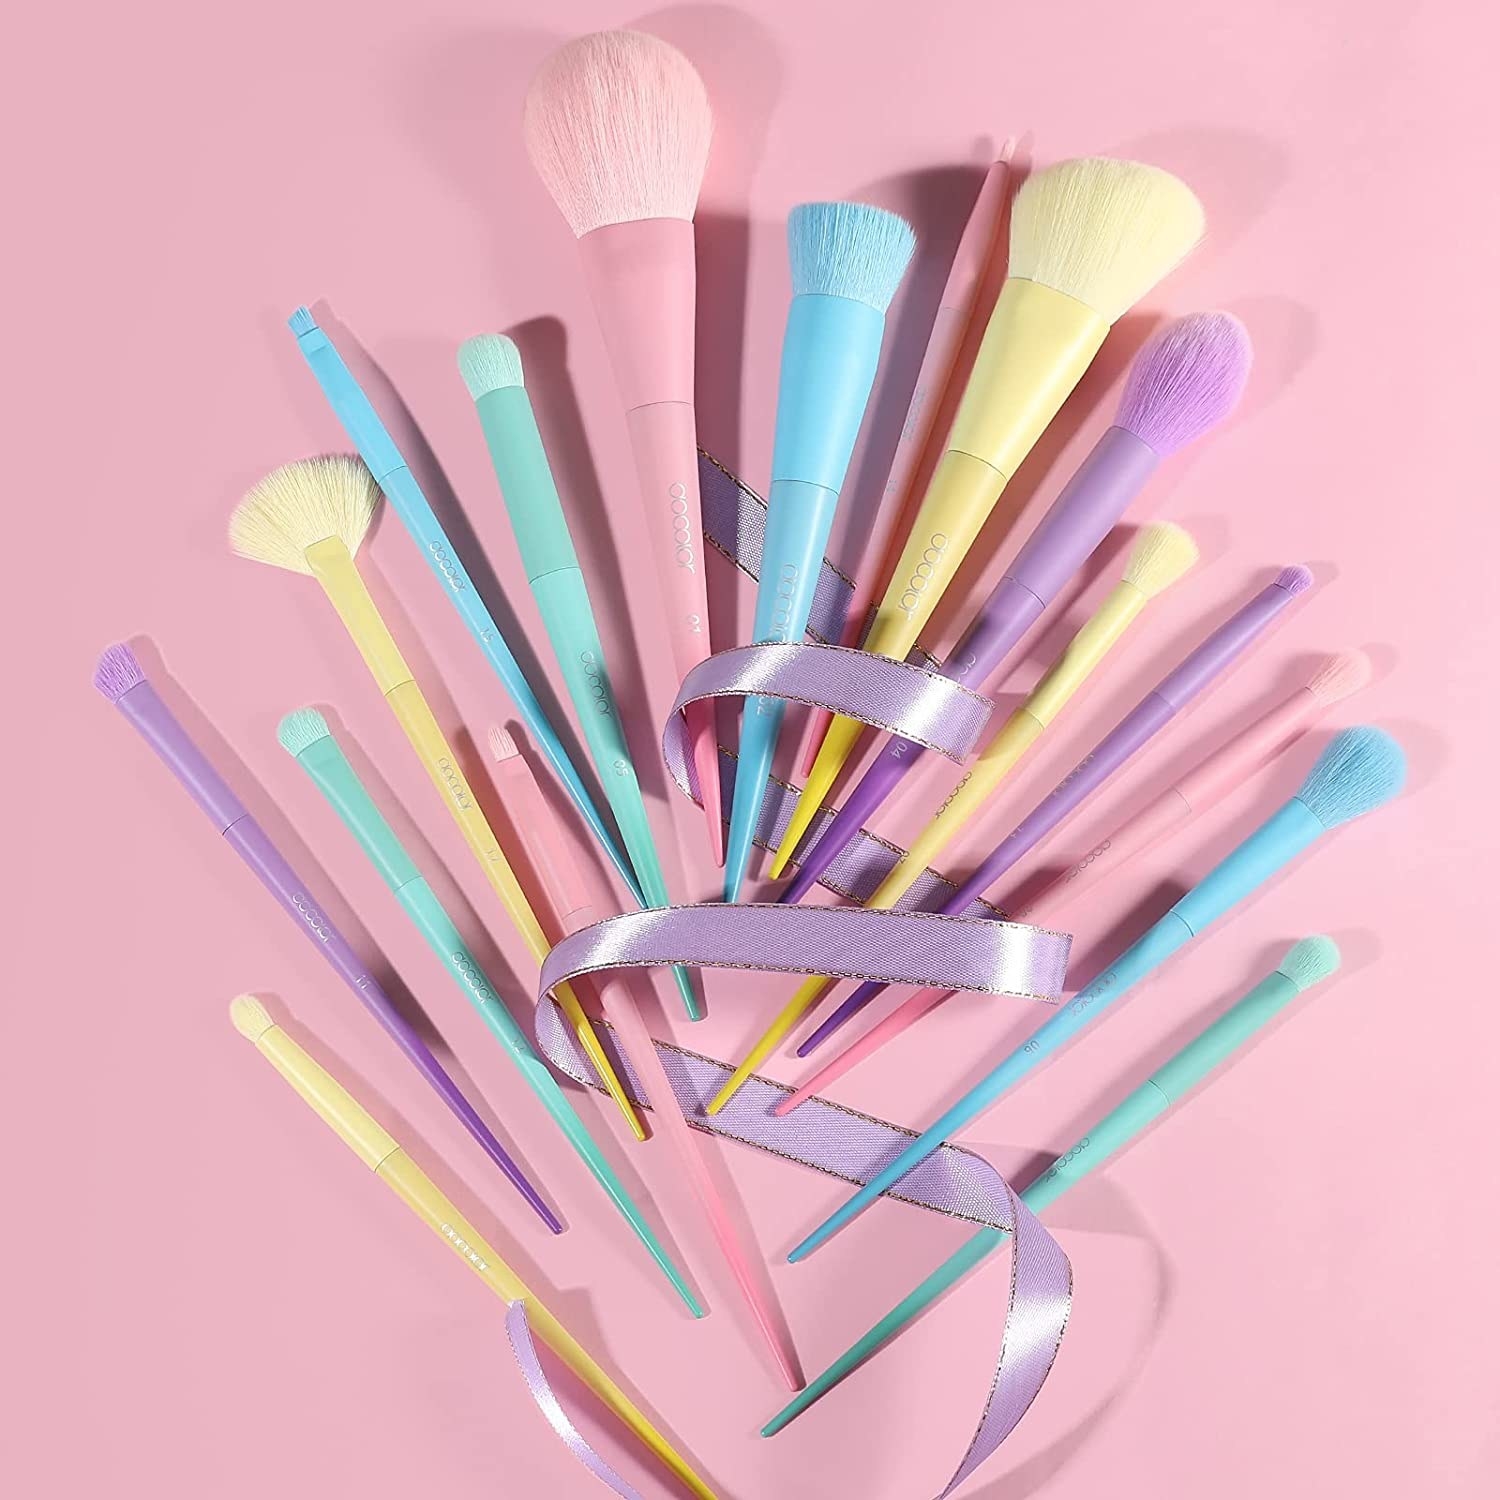 The bright pastel brushes